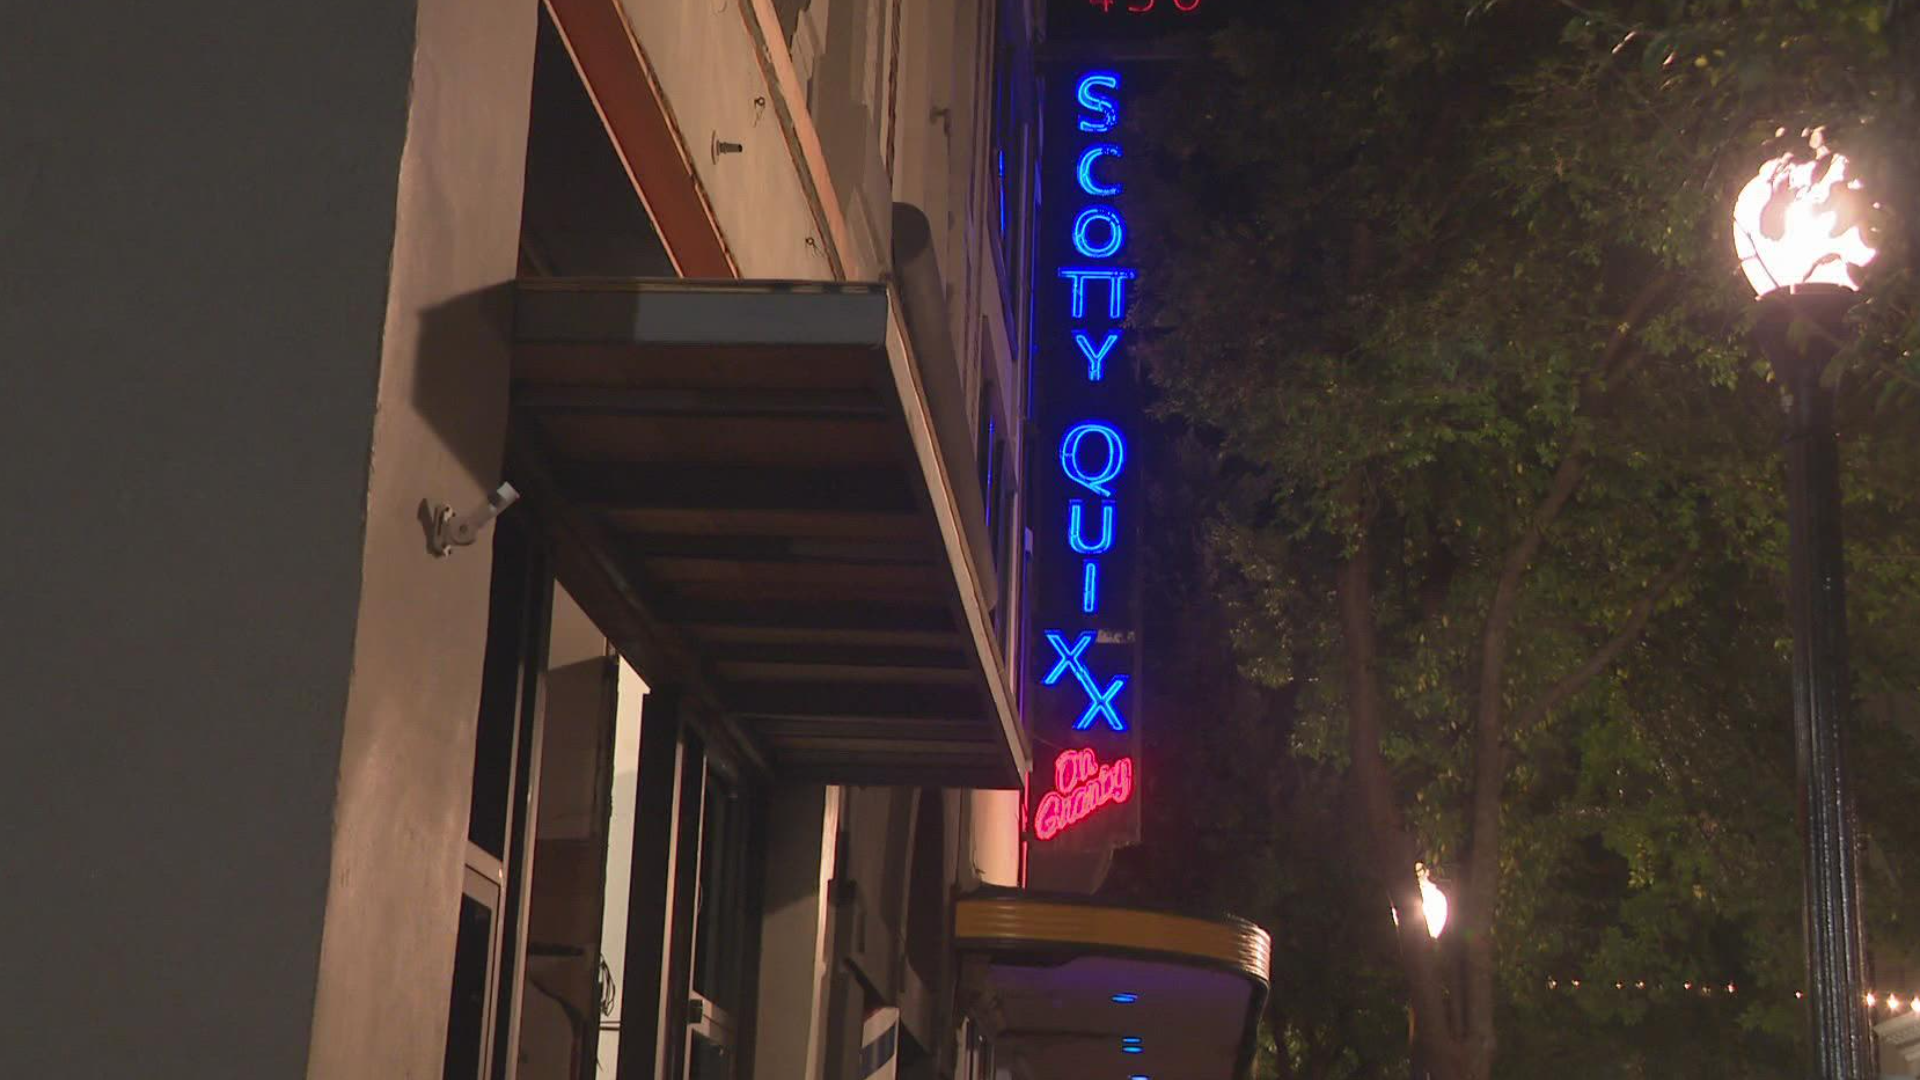 The future of Scotty Quixx hangs in the balance as the city looks to crack down on bars and restaurants.